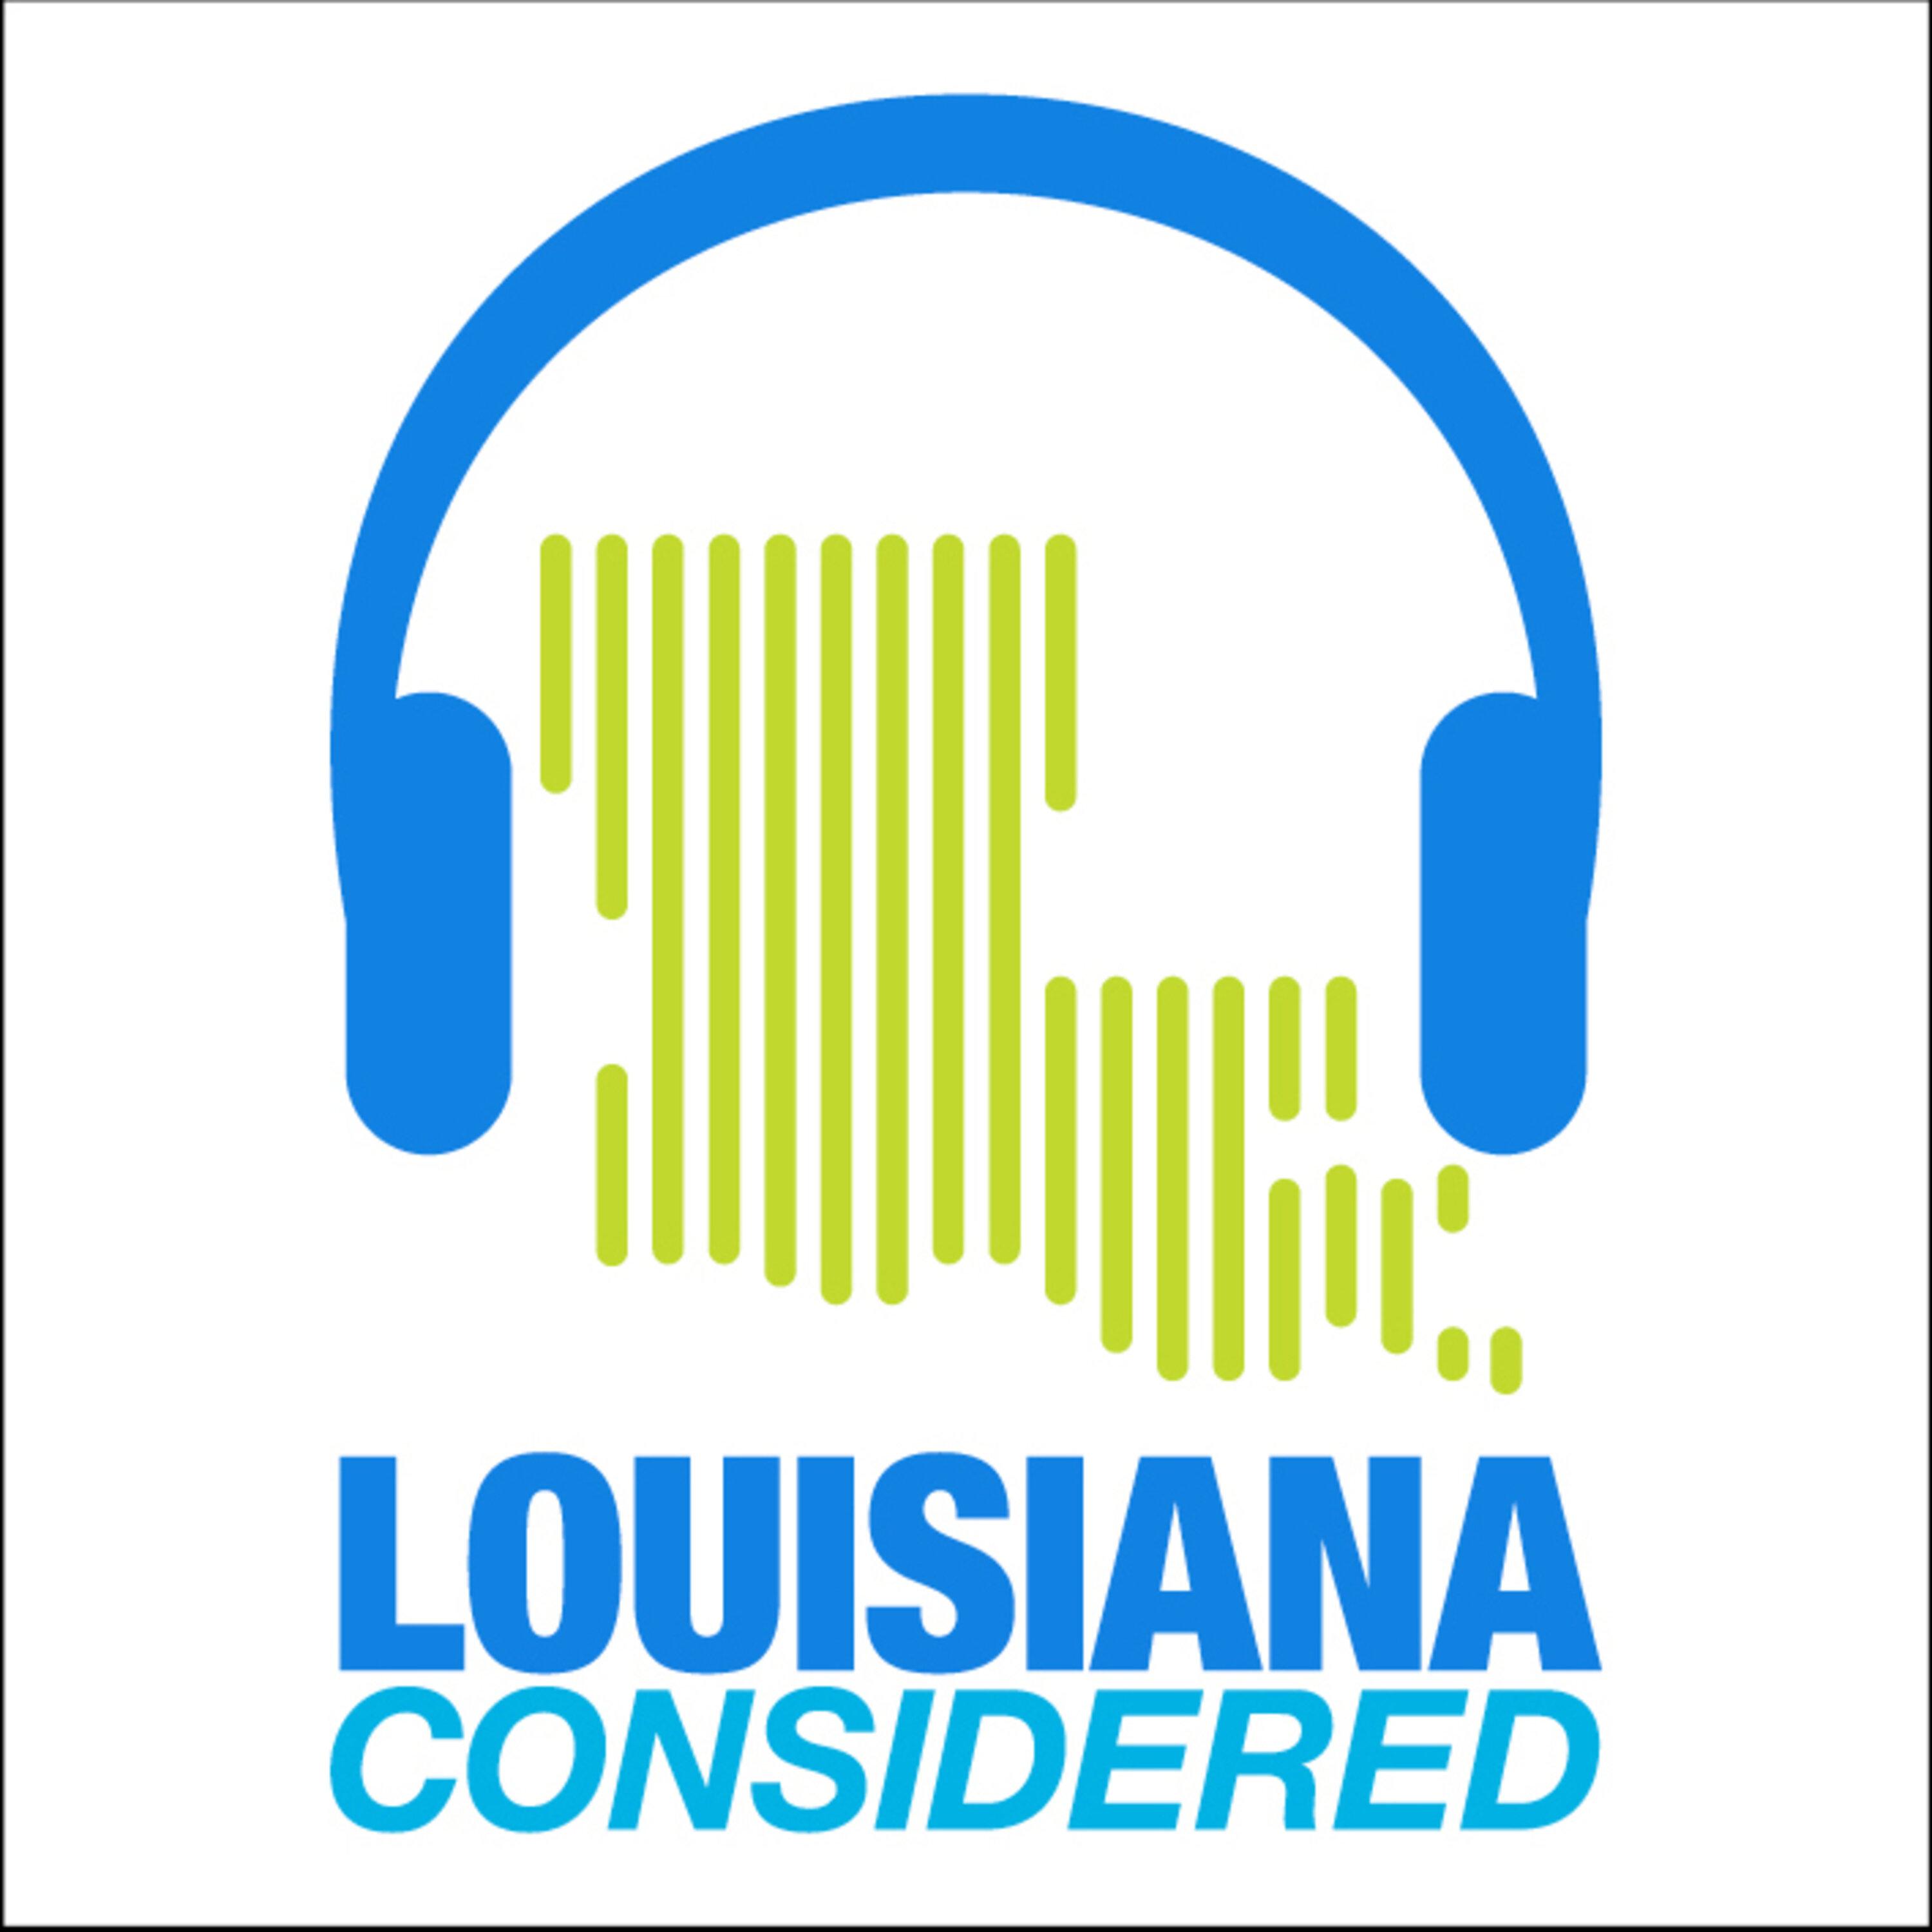 Thumbnail for "Louisiana Considered: Former Governor Edwin Edwards Dies At 93, Louisiana’s Growing Solar Power Industry".